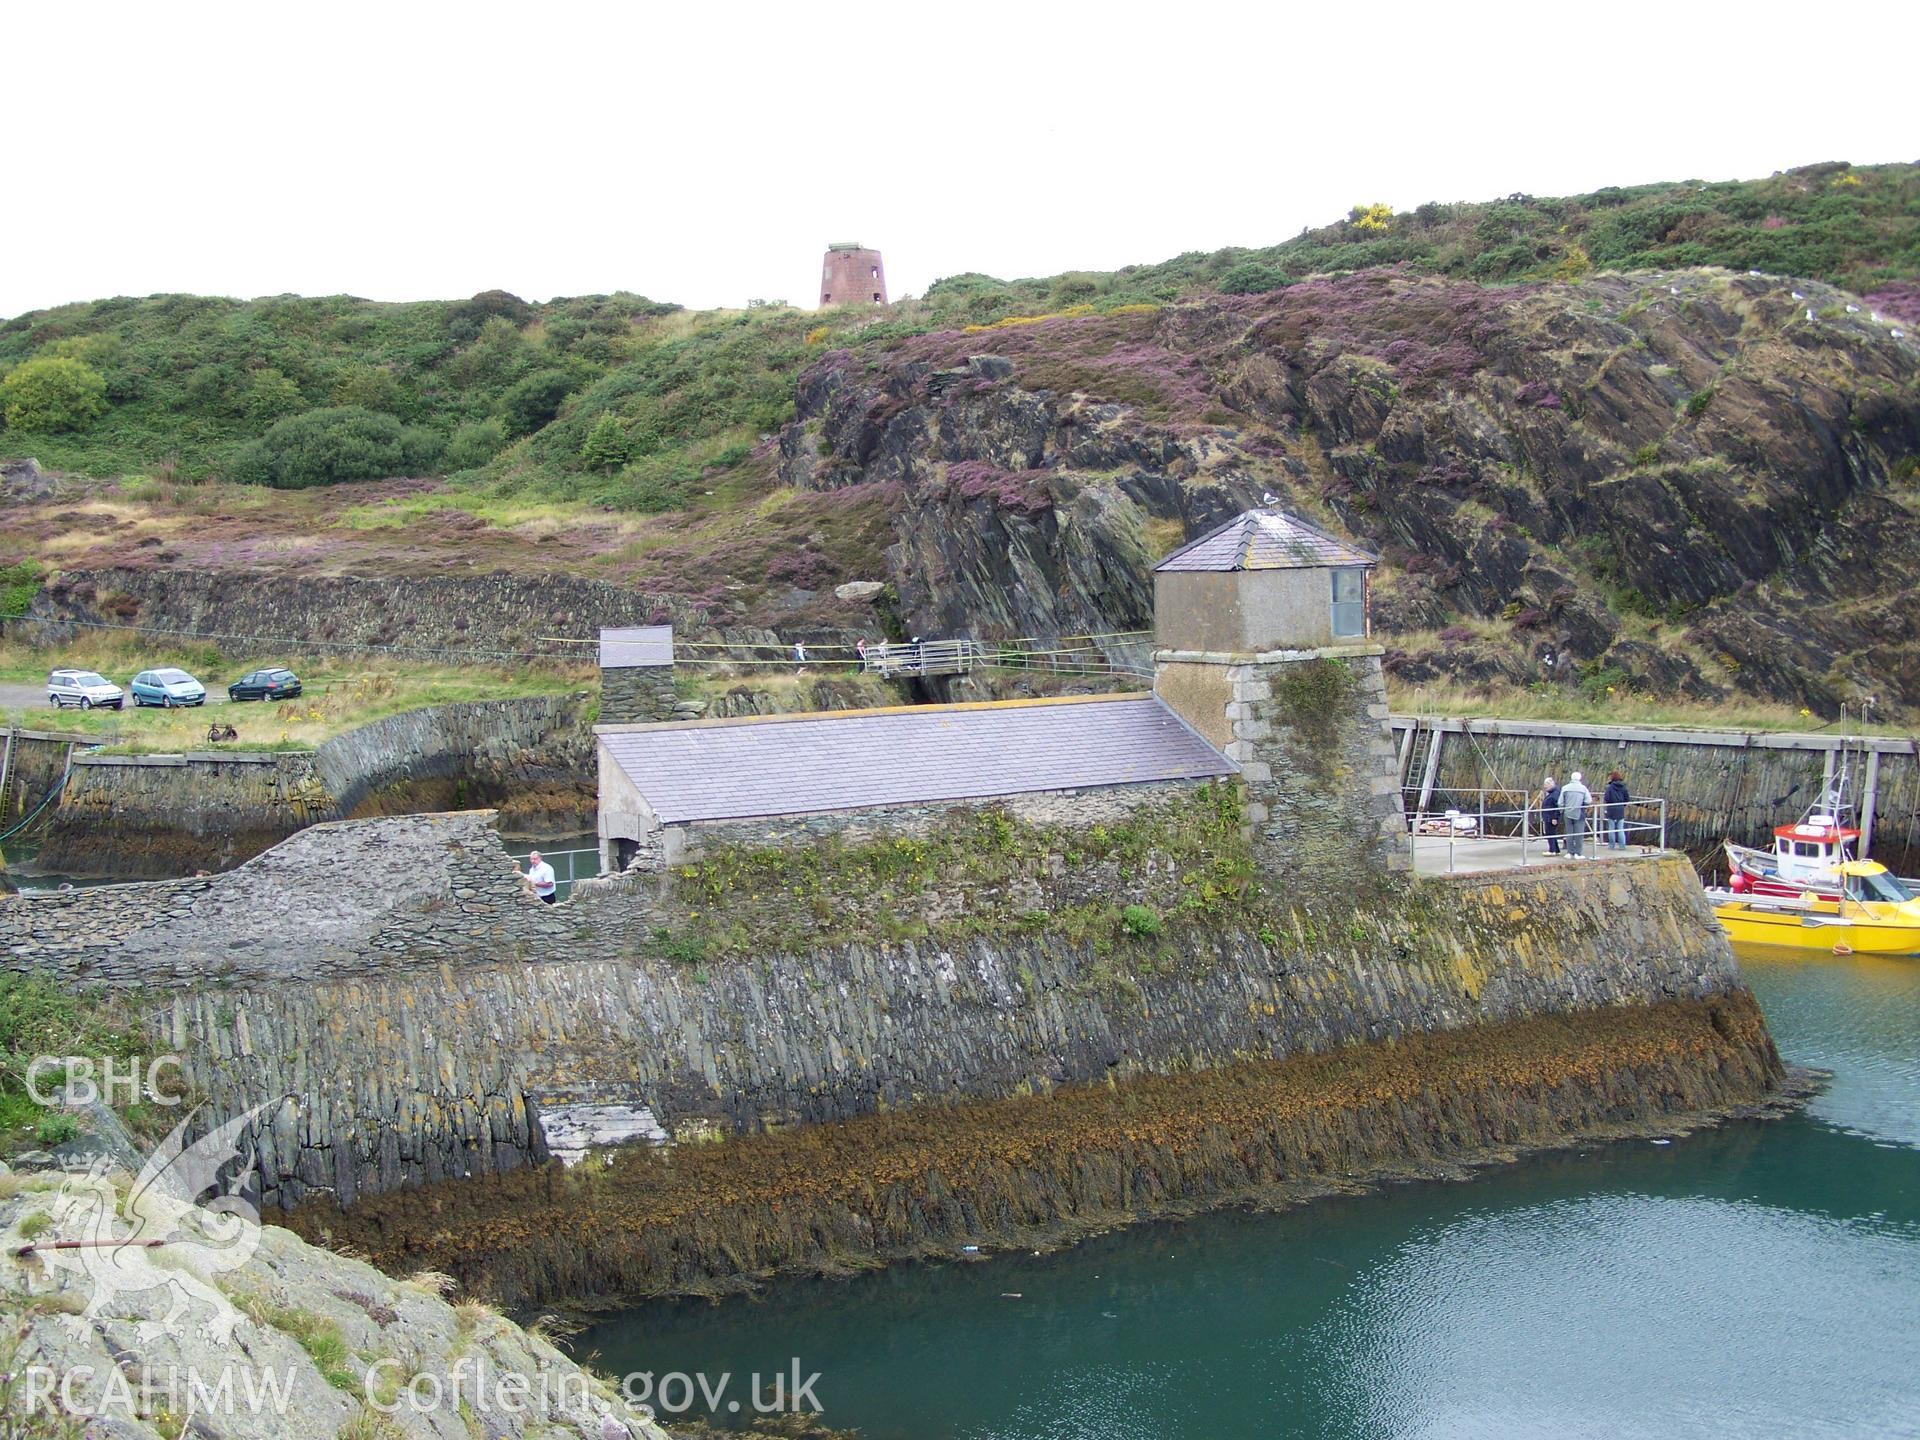 Outer wall of the quay creating the refuge harbour surmounted by the Watchhouse and its leading light. The gap to the left of the Watchhouse shows the former location of the Harbour Master's house (now demolished).